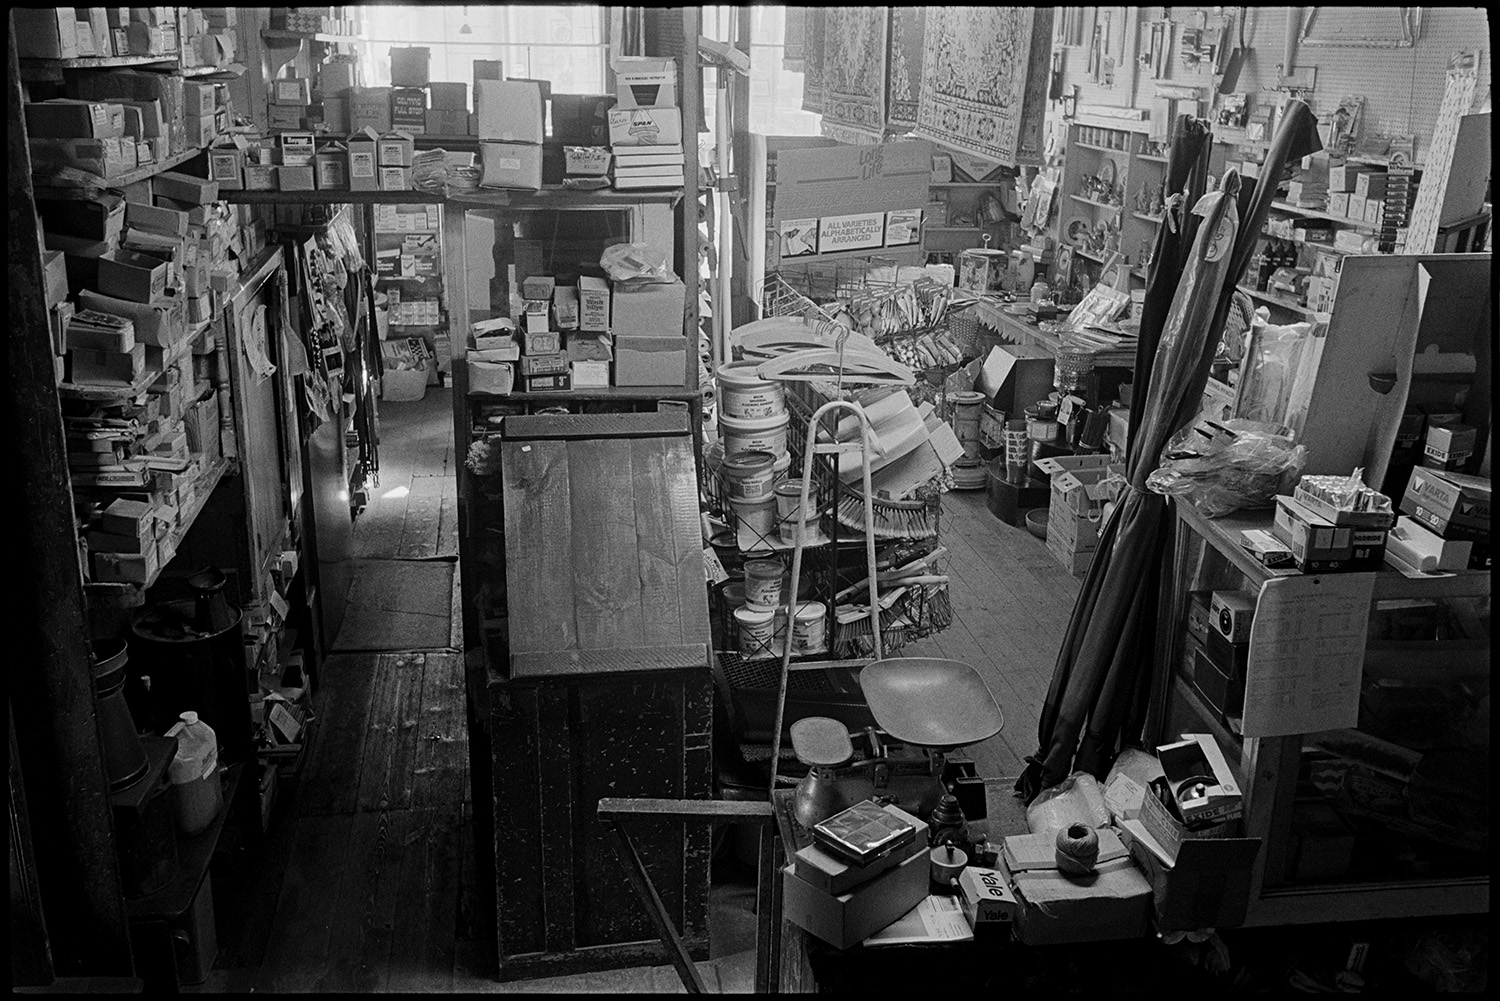 Interior of ironmongers shop, shelves with china, coal store. Proprietors at counter.
[Interior of Ellacott's ironmongery in Market Street, Hatherleigh. A wooden counter is shown with weighing scales, and is surrounded by shelves and racks full of various goods.]